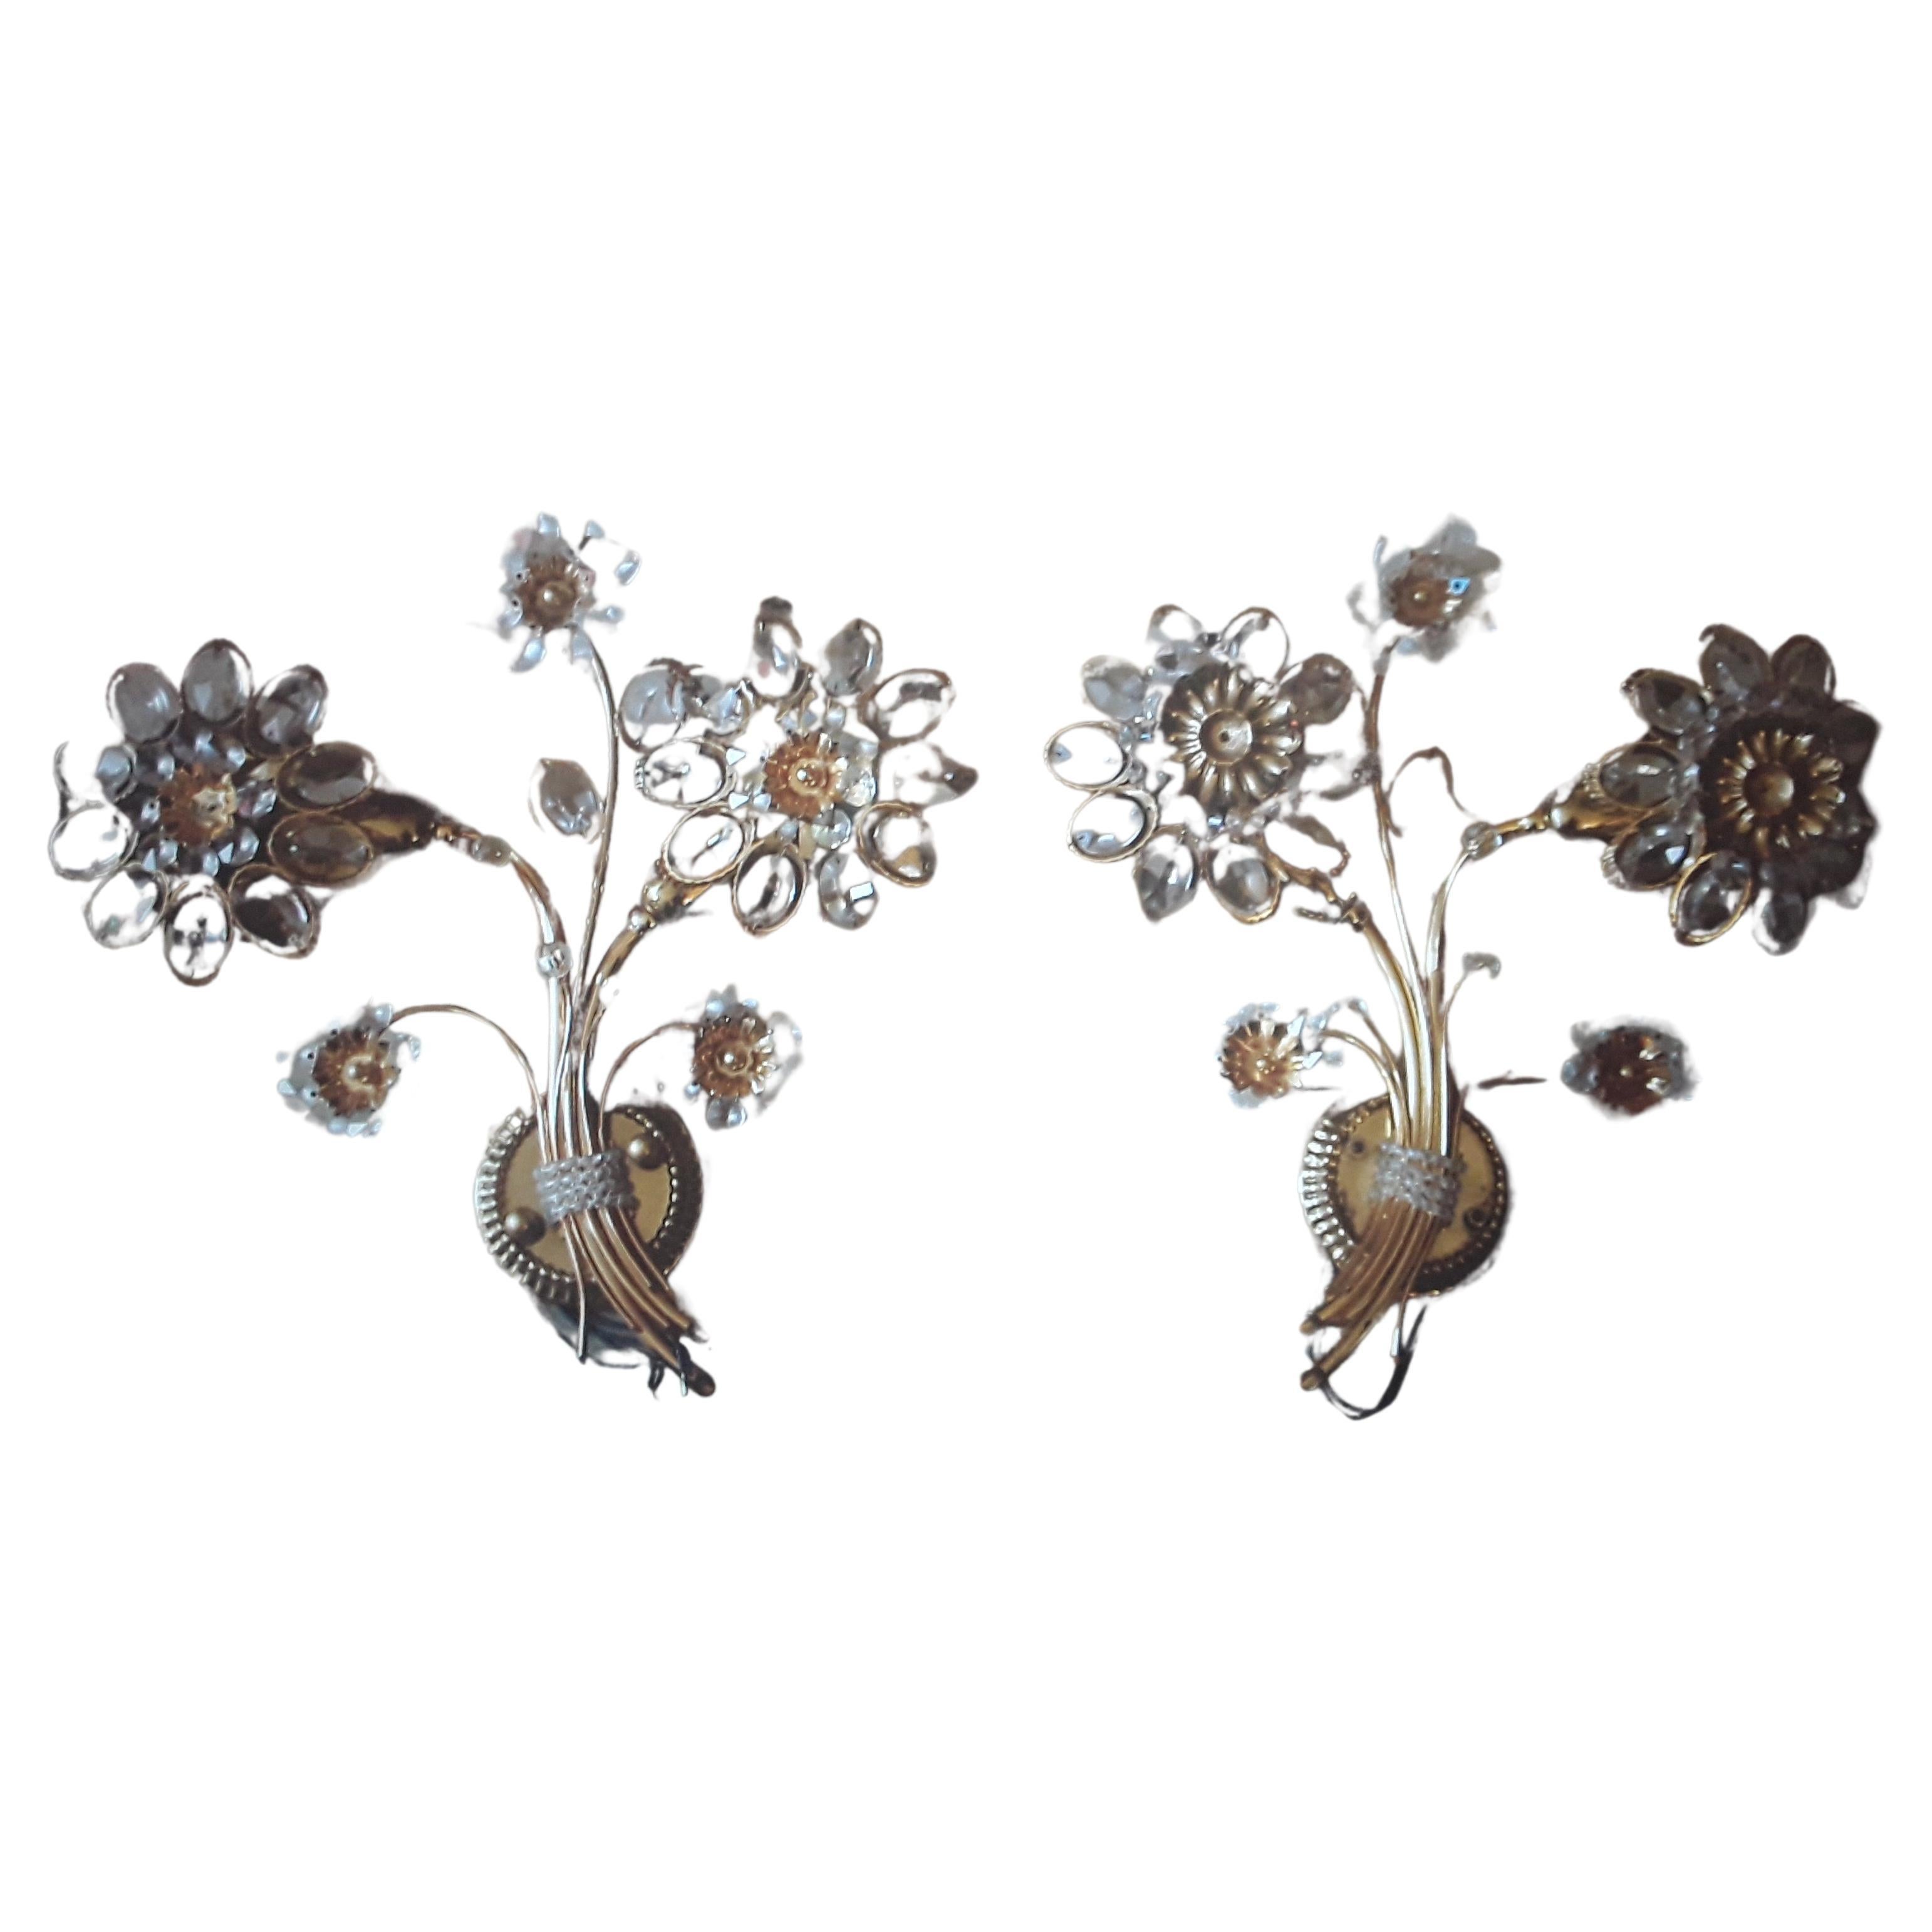 Pair 1960s Austrian Mid Century Modern 24K w/Cut Crystal Floral Form Wall Sonces For Sale